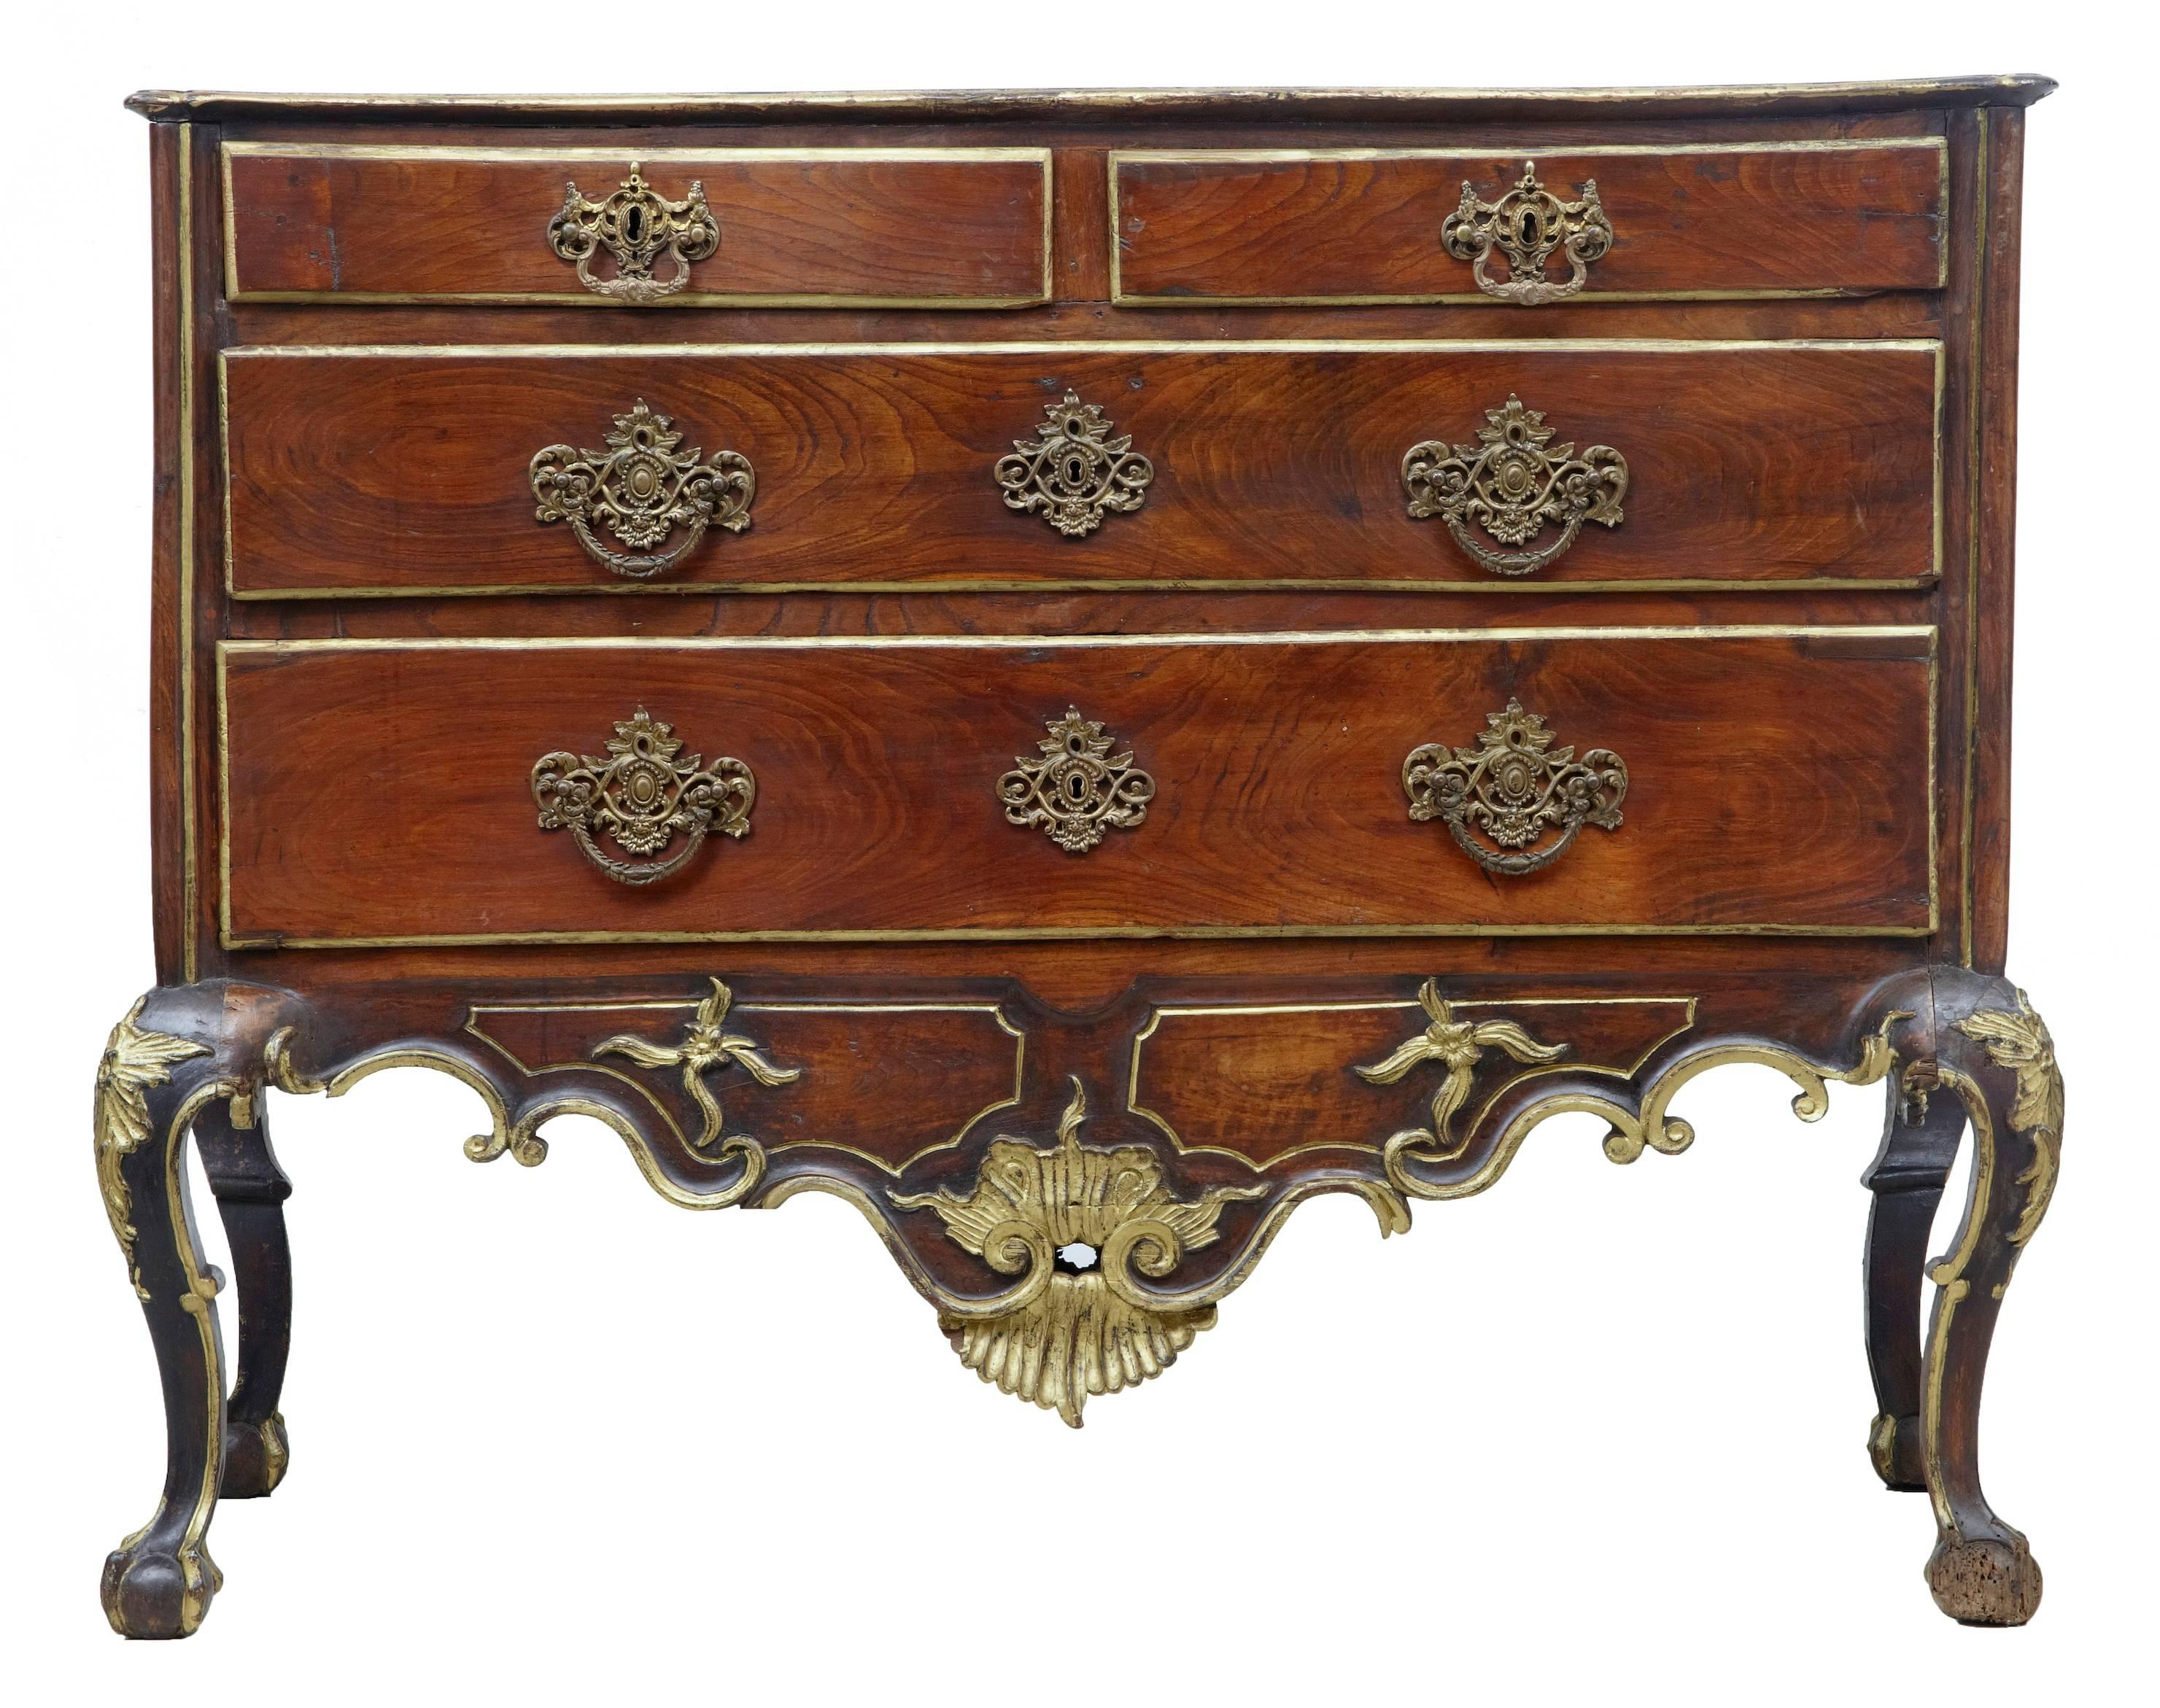 Excellent quality Dom Jose period commode, circa 1770.
Two short over two long drawers.
Profusely carved and detailed with parcel-gilt decoration, shells to the front frieze and sides.
Standing on cabriole legs and ball and claw feet.

Minor